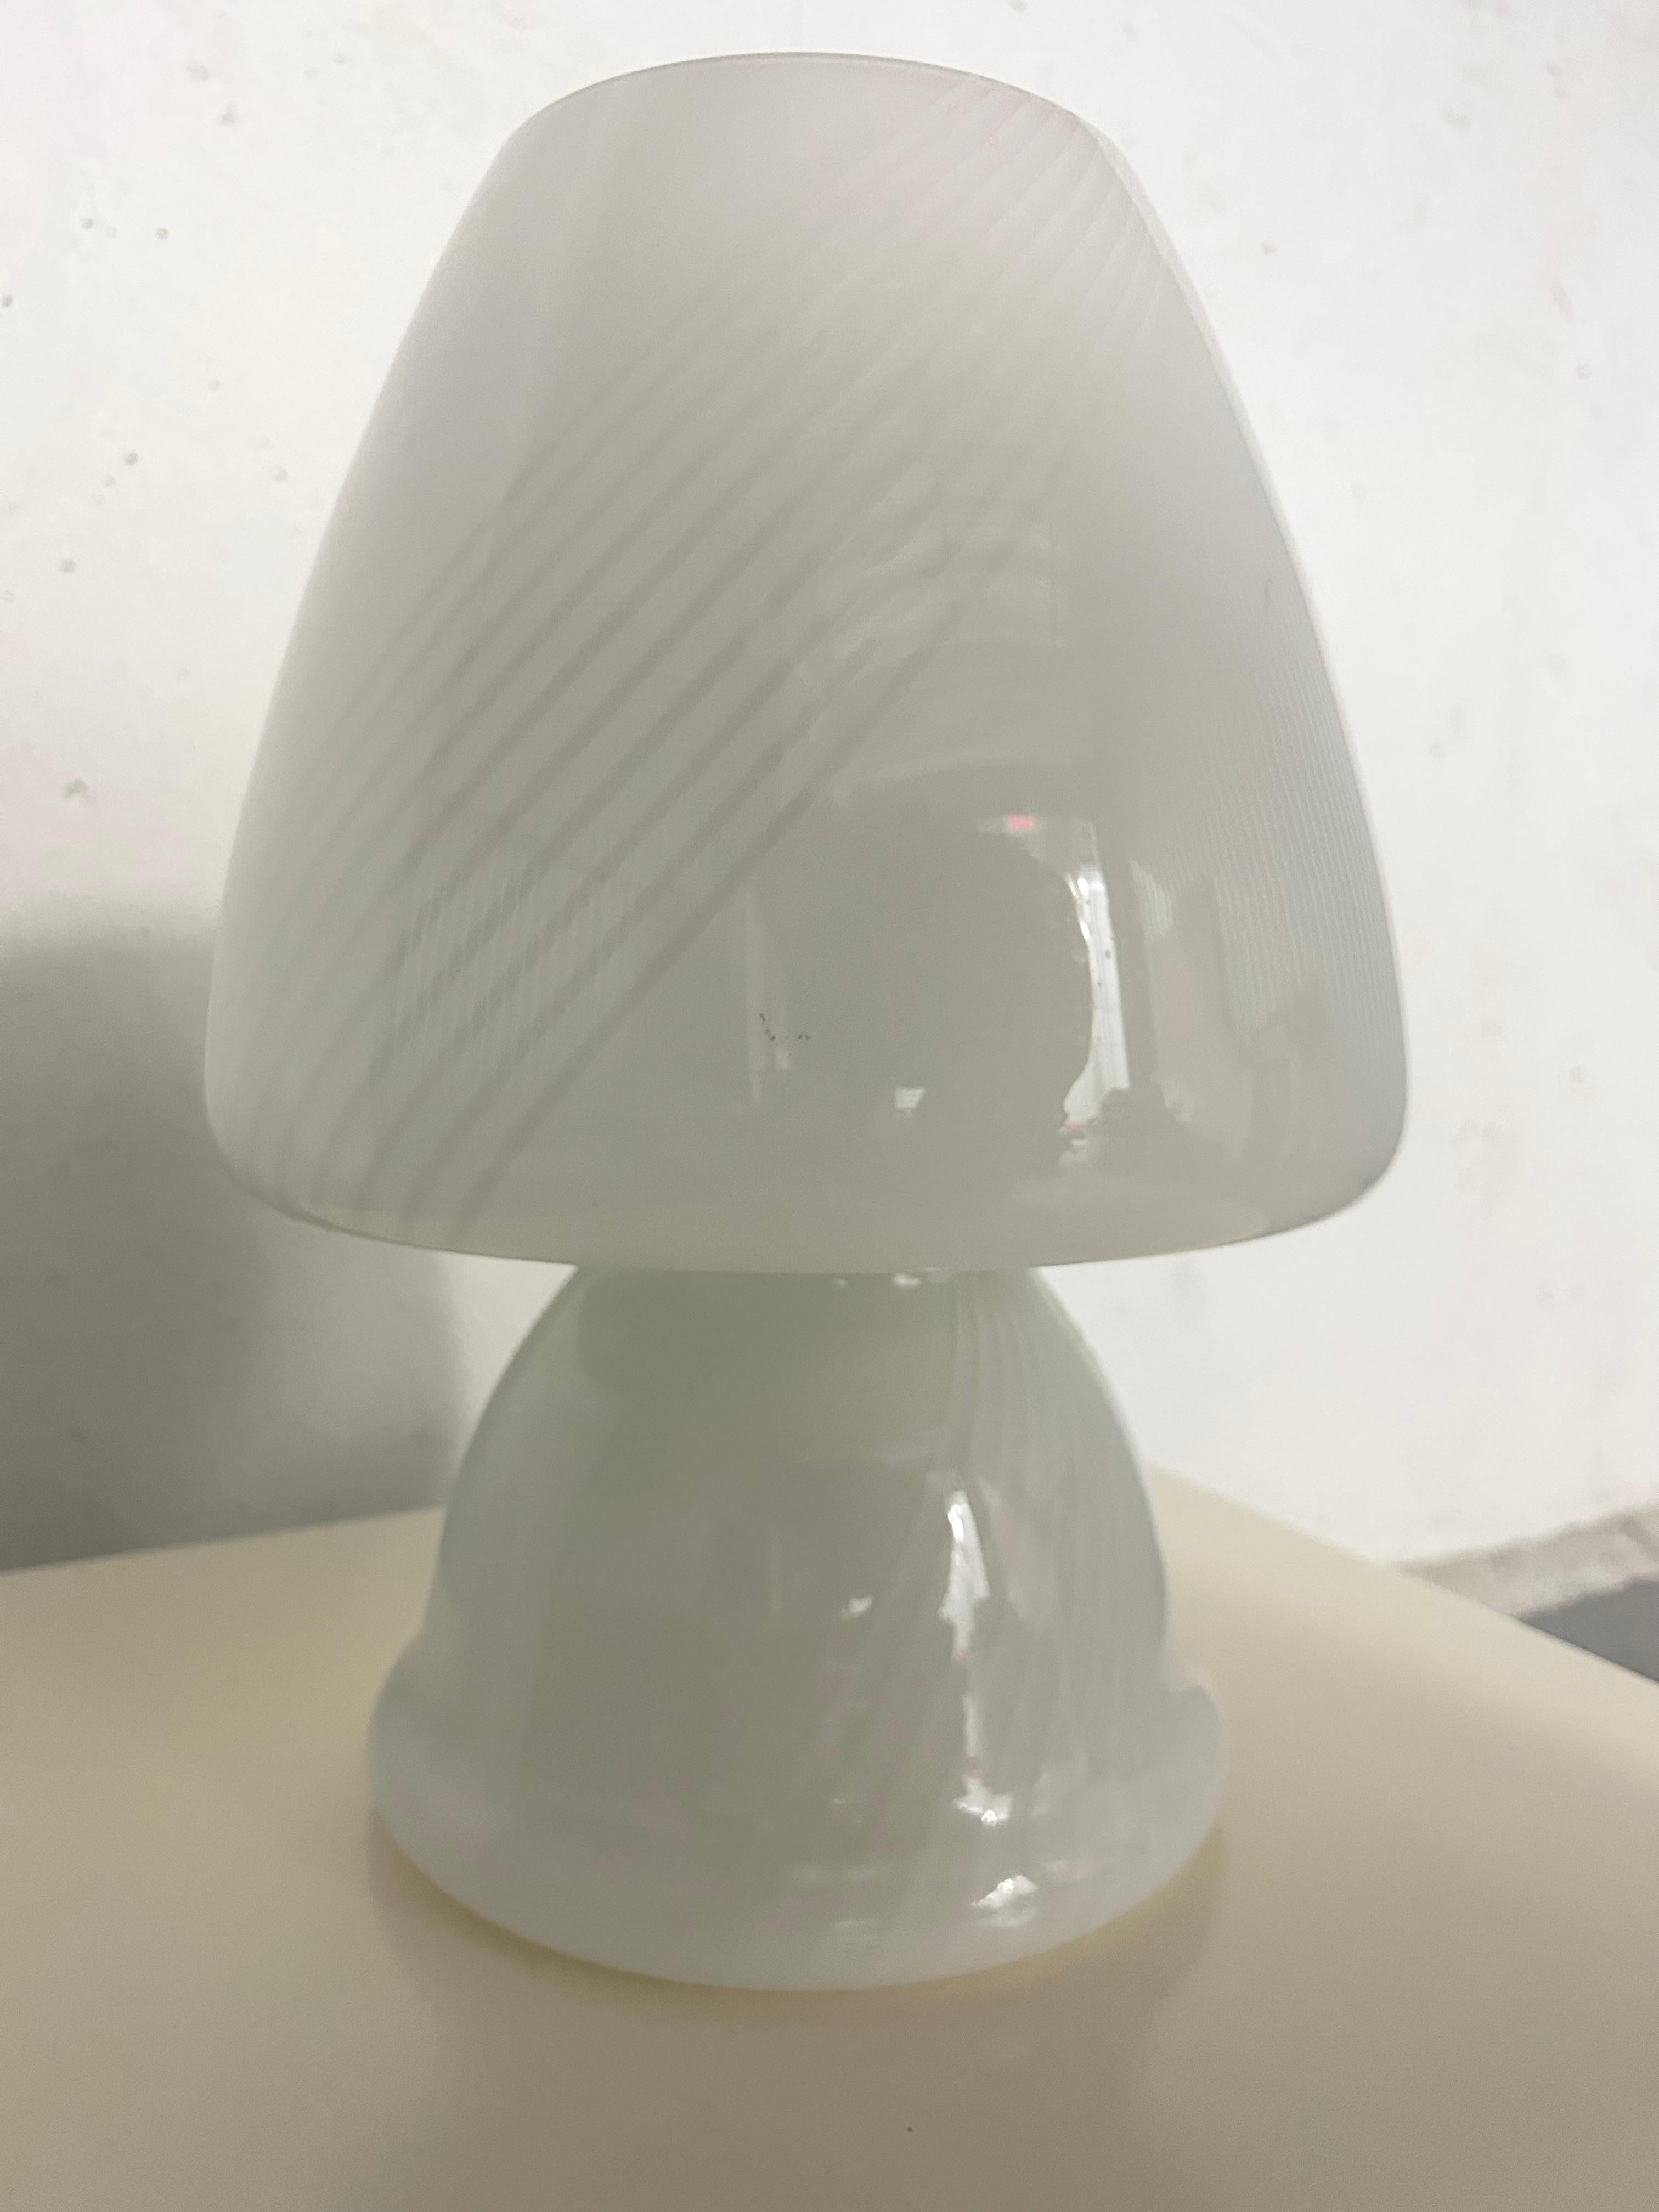 Vintage 1970s large blown glass mushroom lamp with swirl design. Unmarked - no manufacturer or origin info. Possibly from Murano Italy. No chips or scratches. US plug has a switch on the cord. 

16” height
10” wide